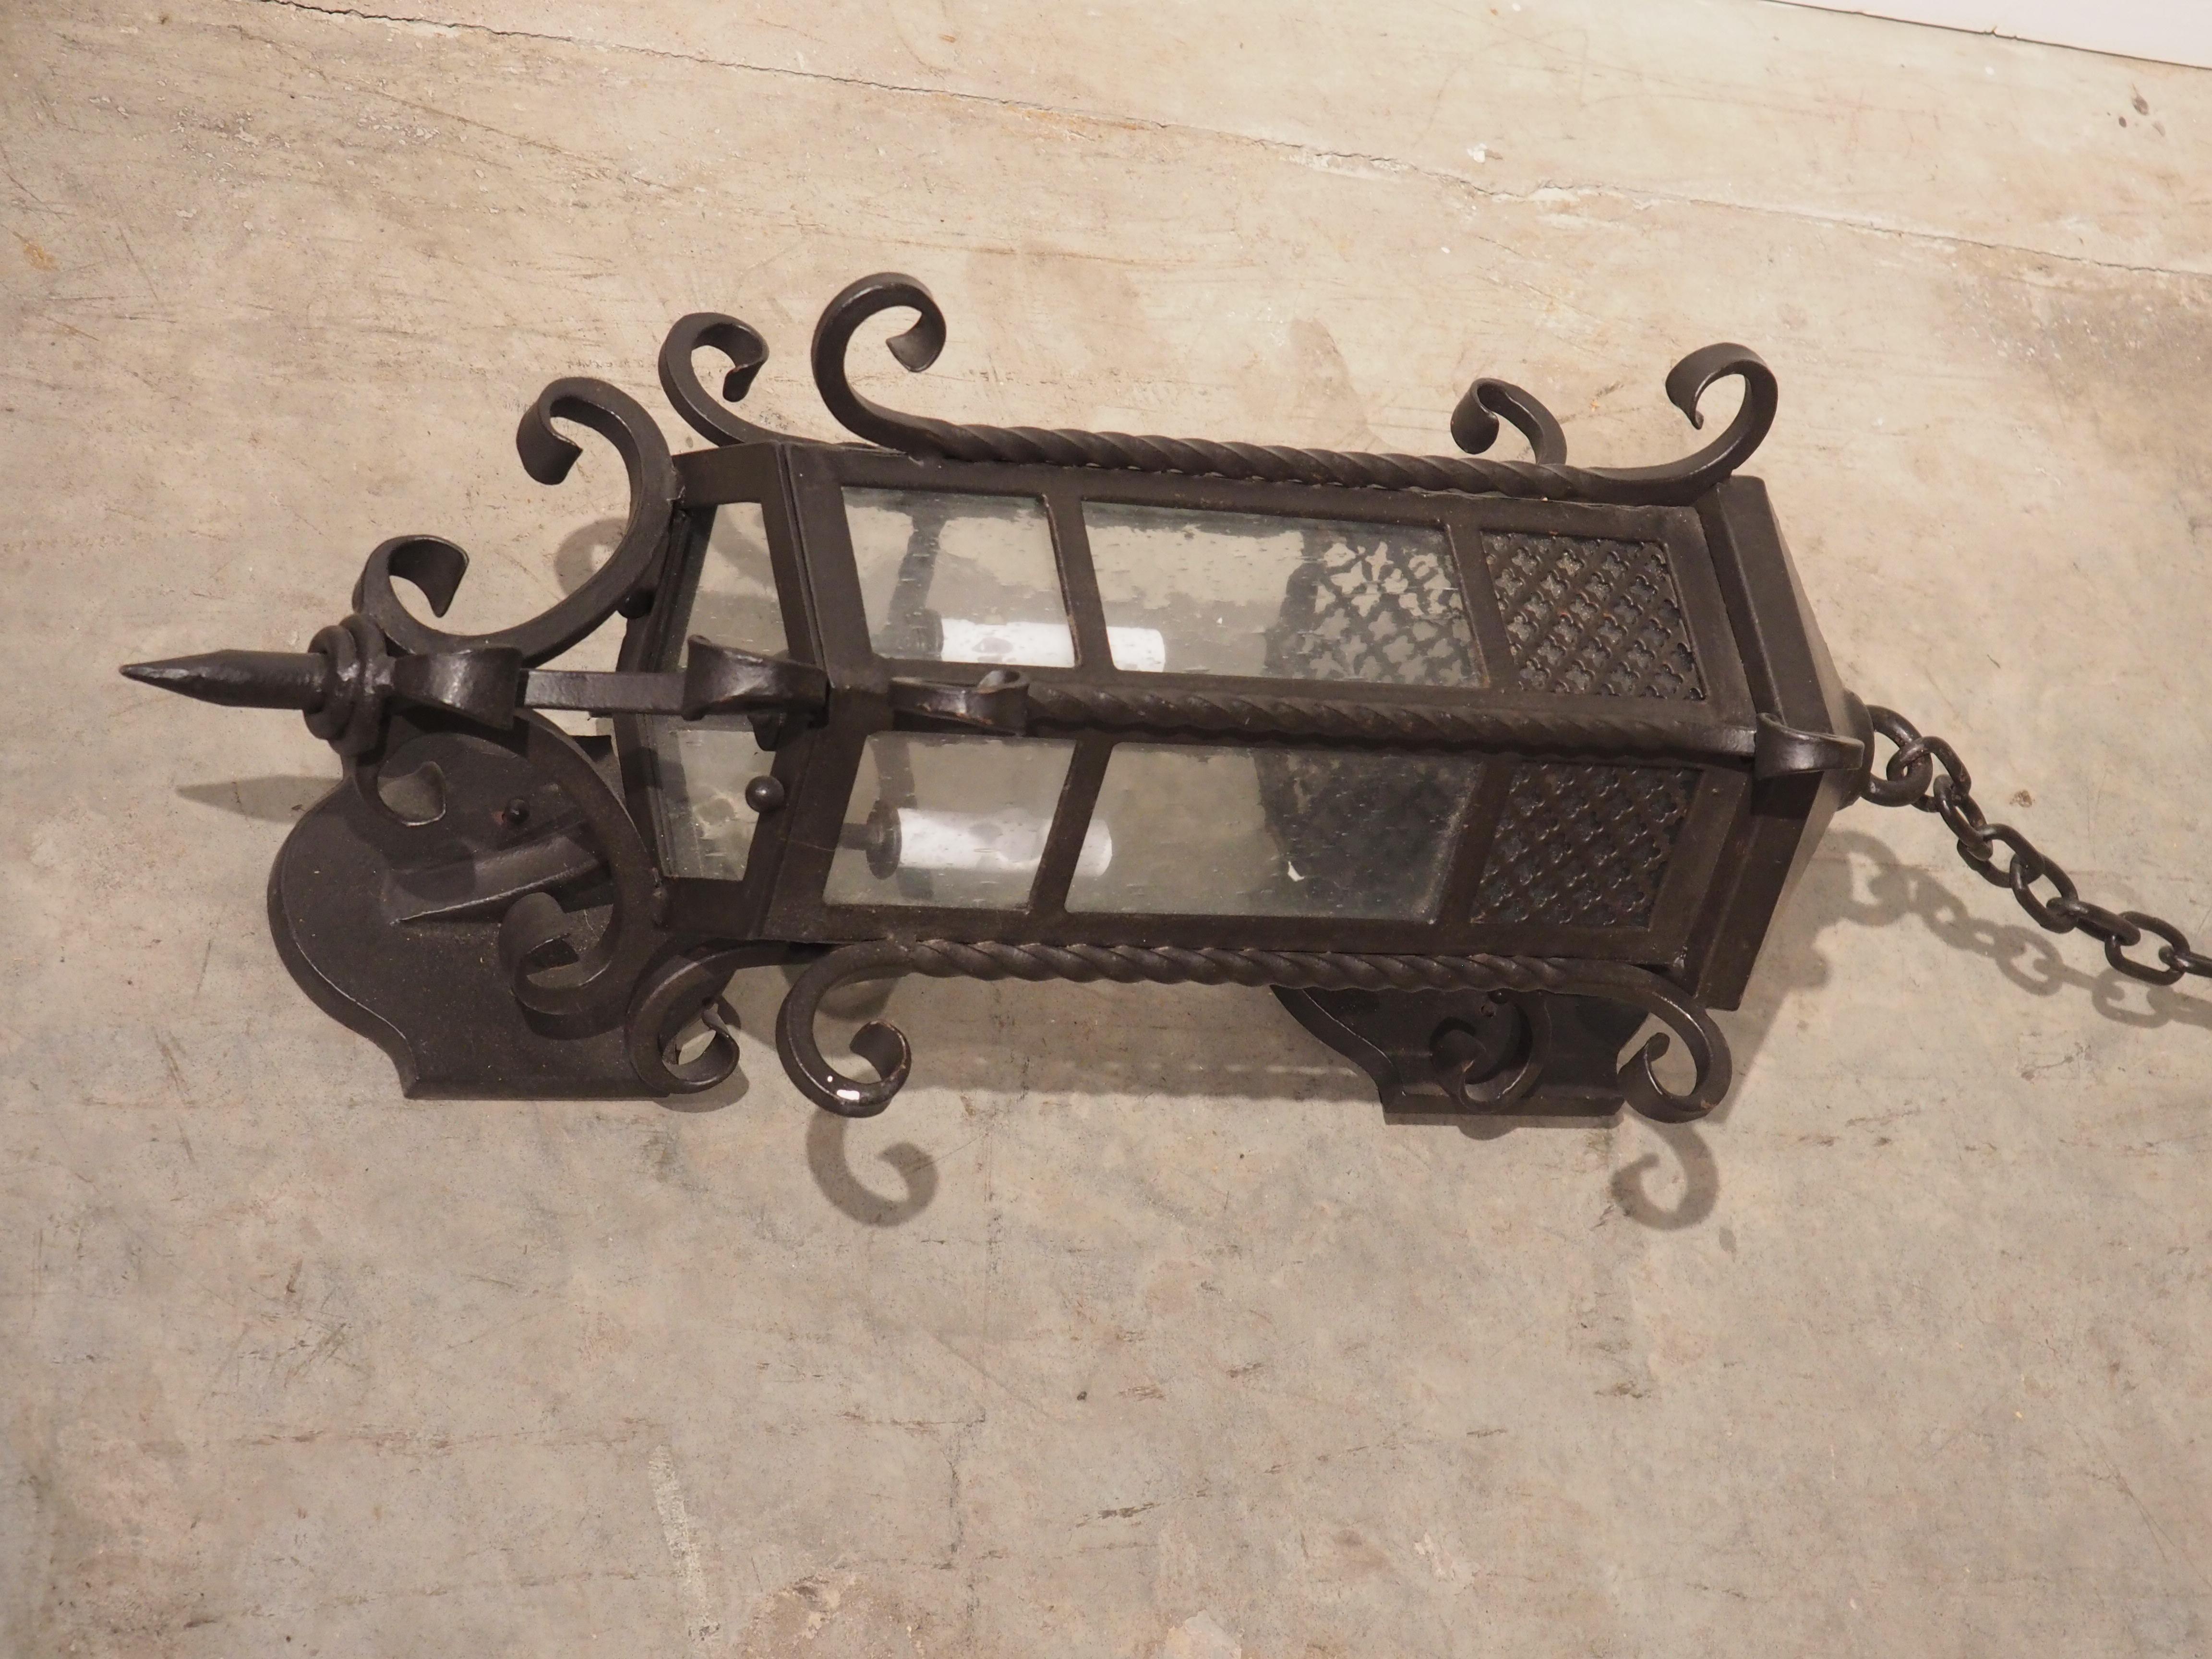 American Hexagonal Wrought Iron Lantern with Chained Wall Mount